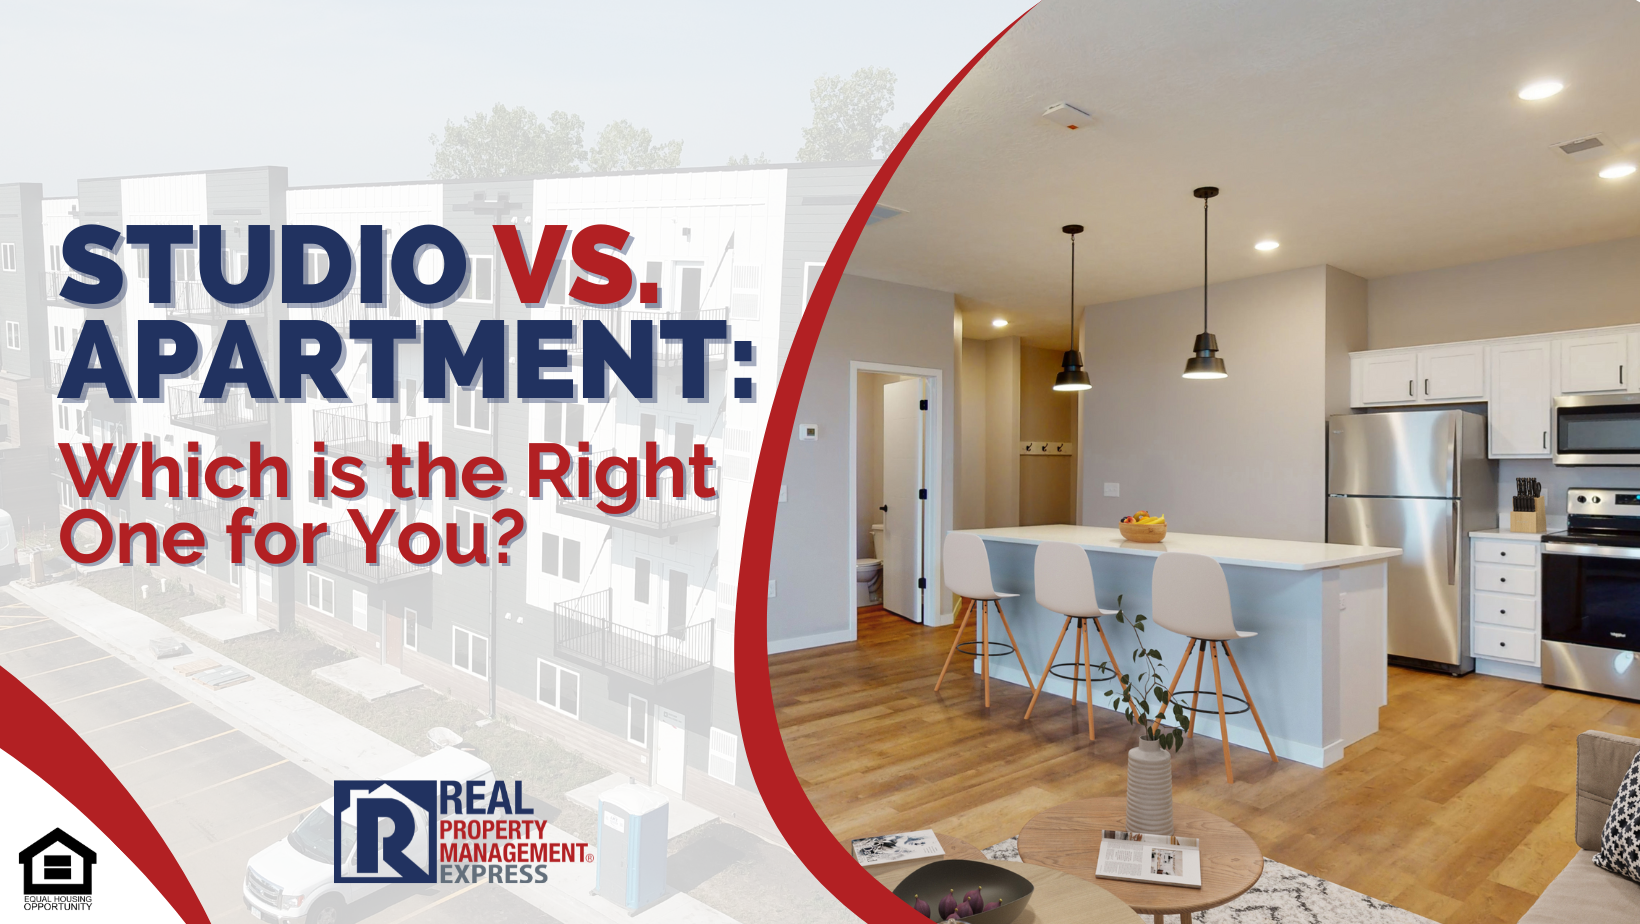 Studio vs. Apartment: Which is the Right One for You?